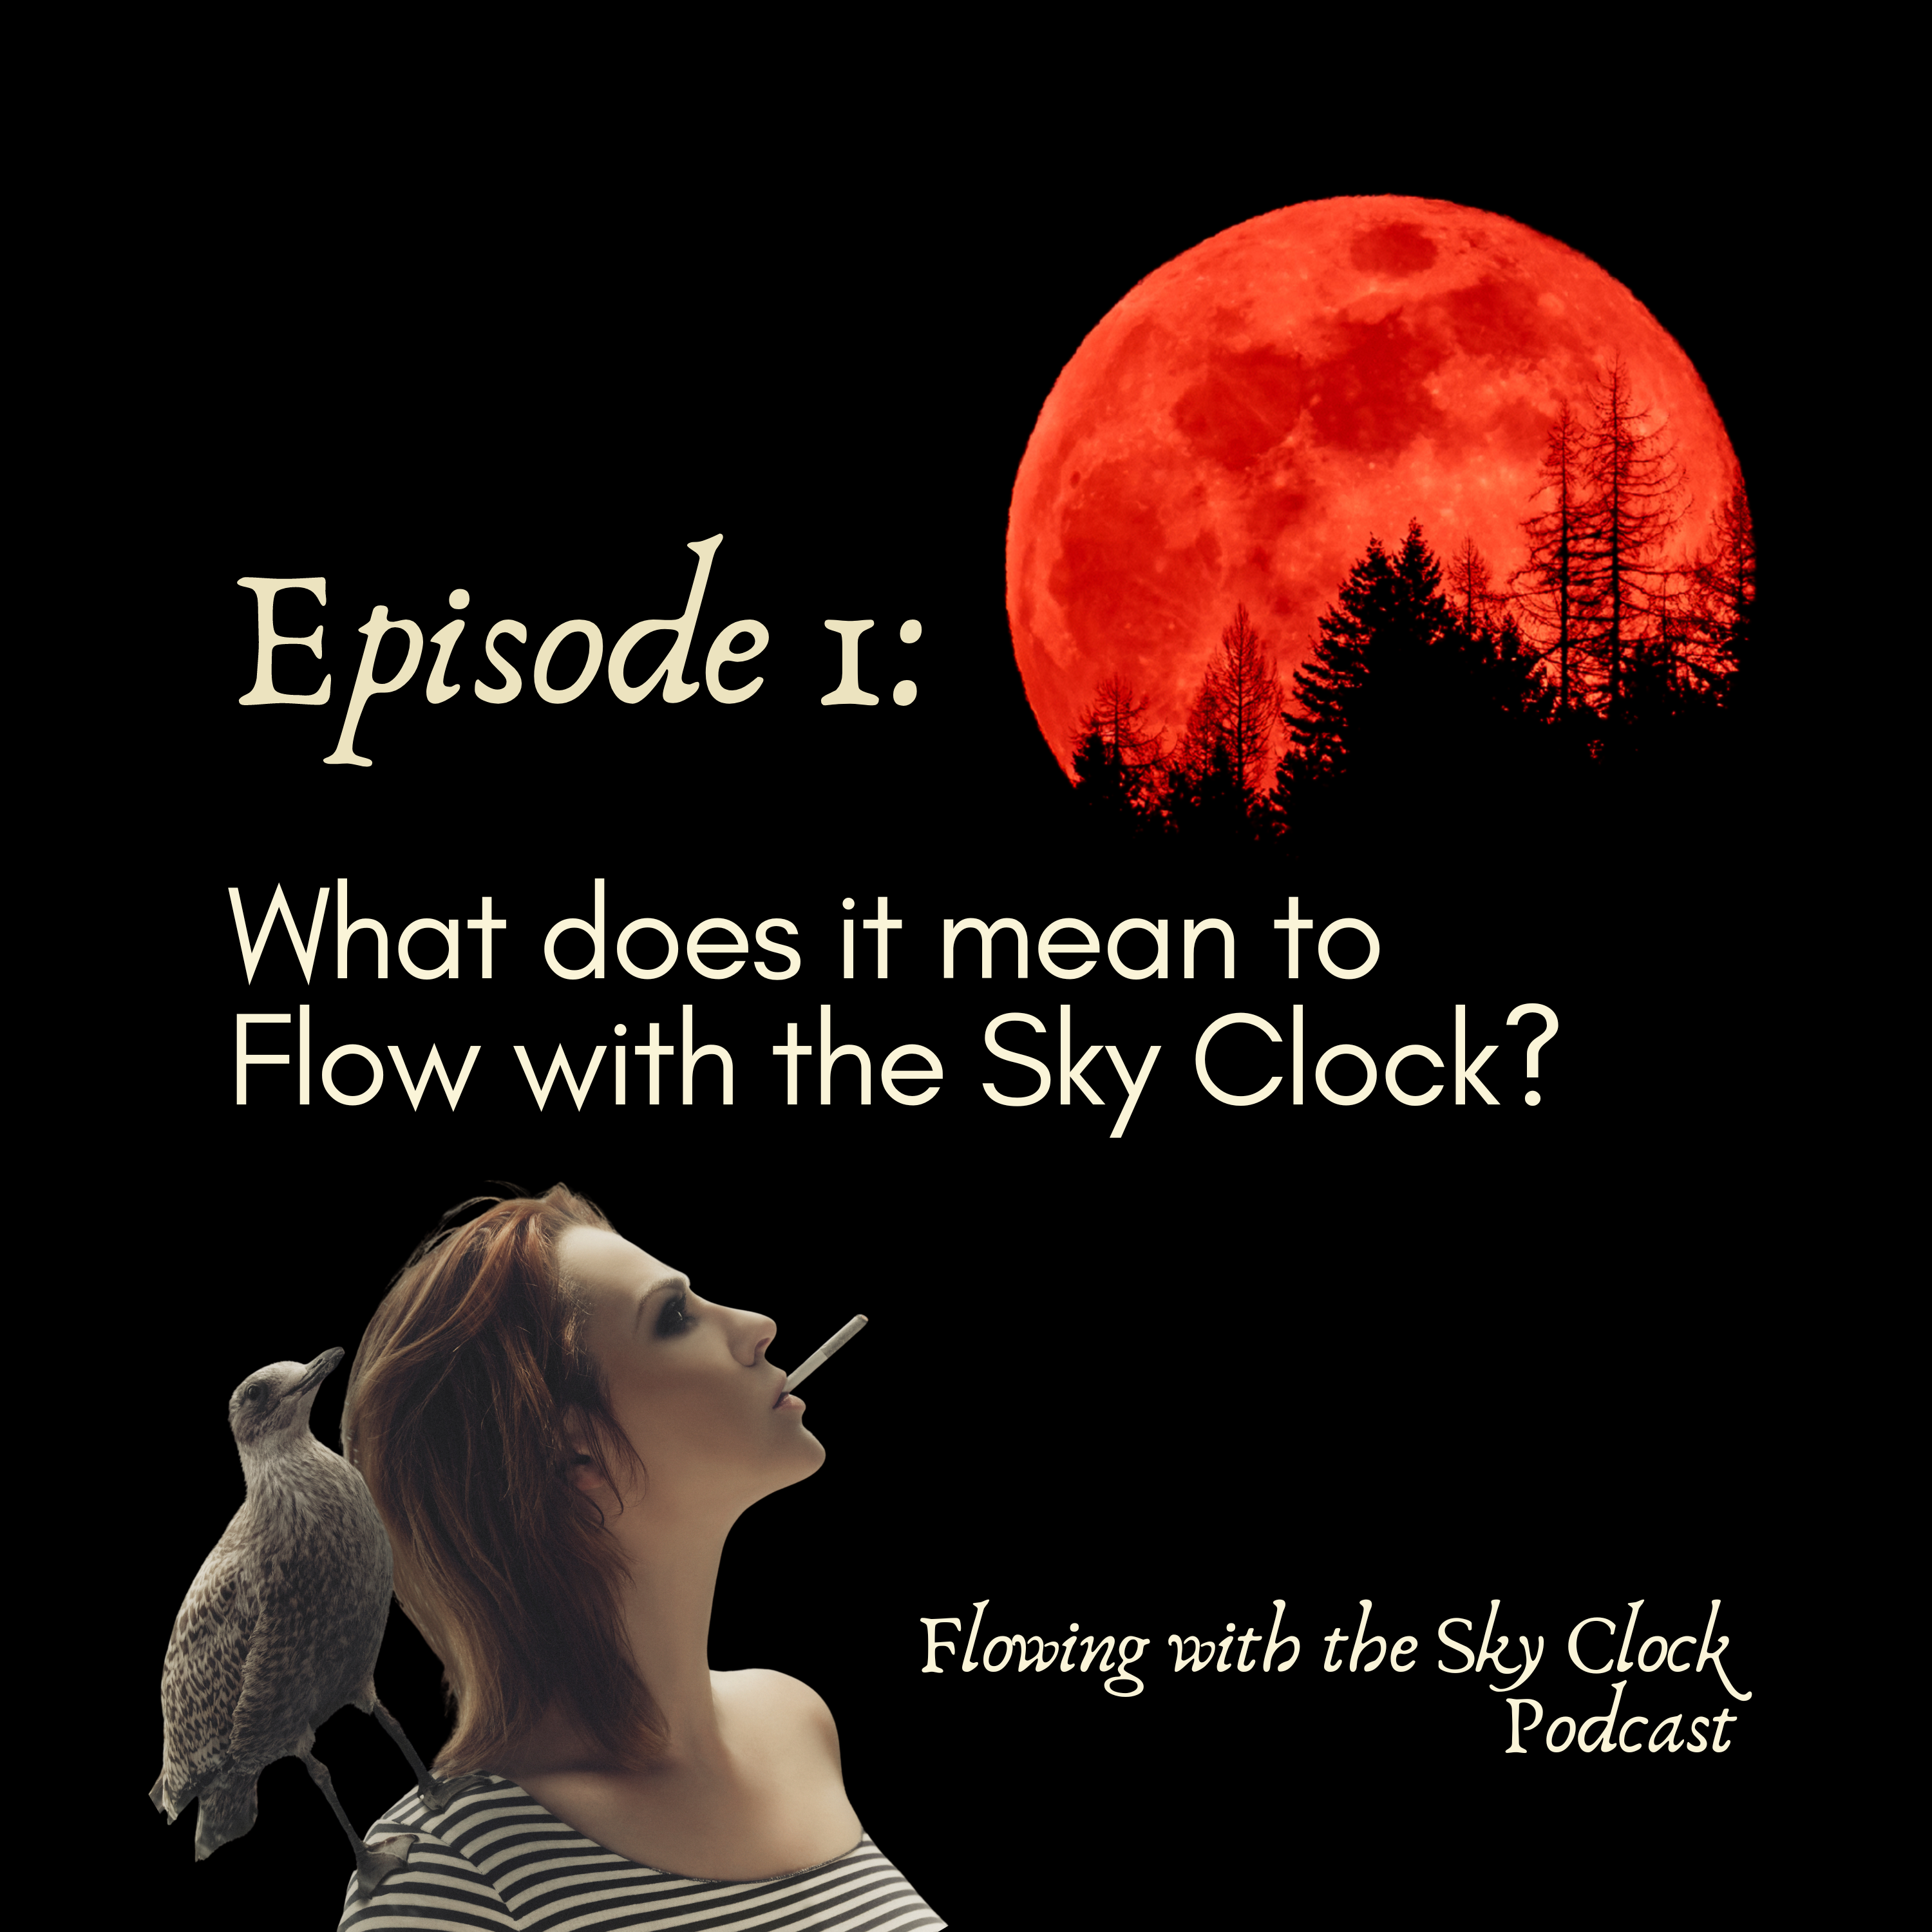 Ep 1: What does it mean to flow with the Sky Clock?